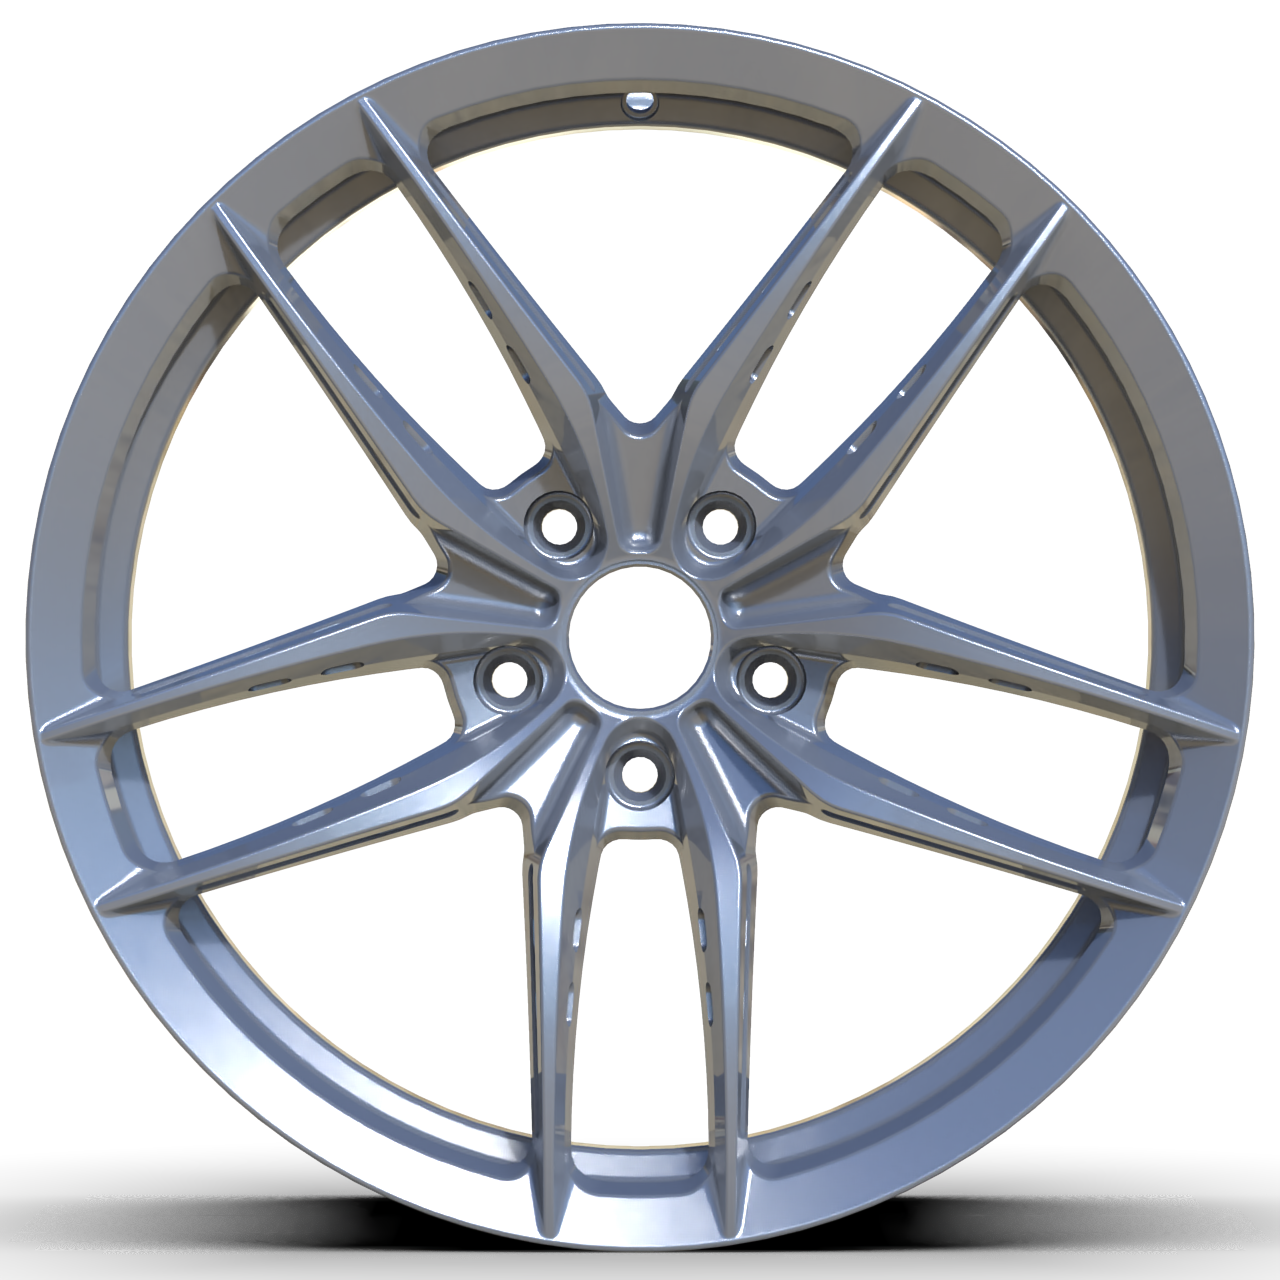 HOW ARE ALLOY WHEELS MADE?